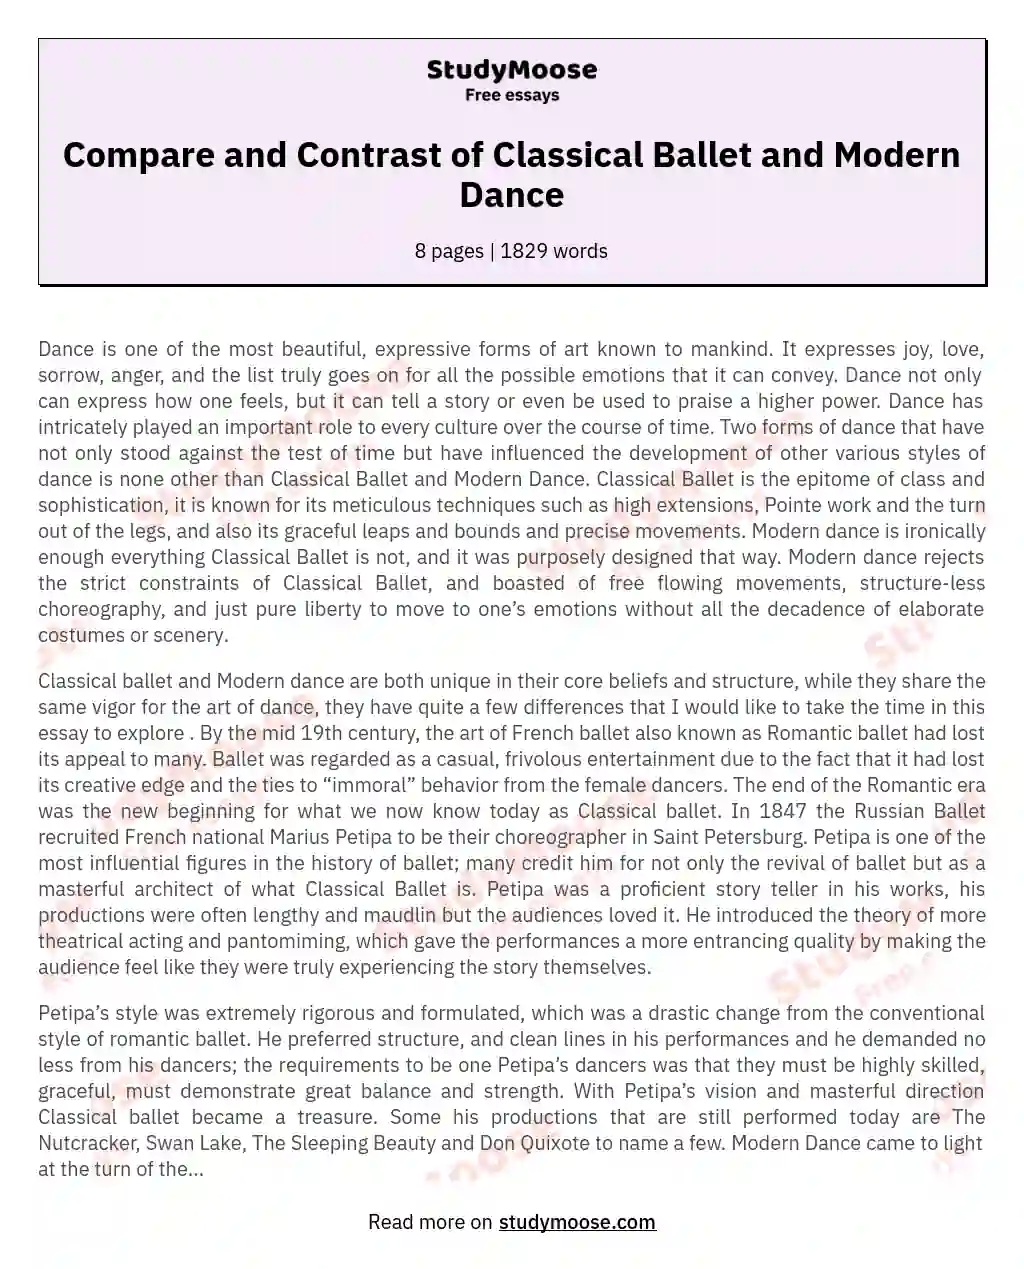 Compare and Contrast of Classical Ballet and Modern Dance essay